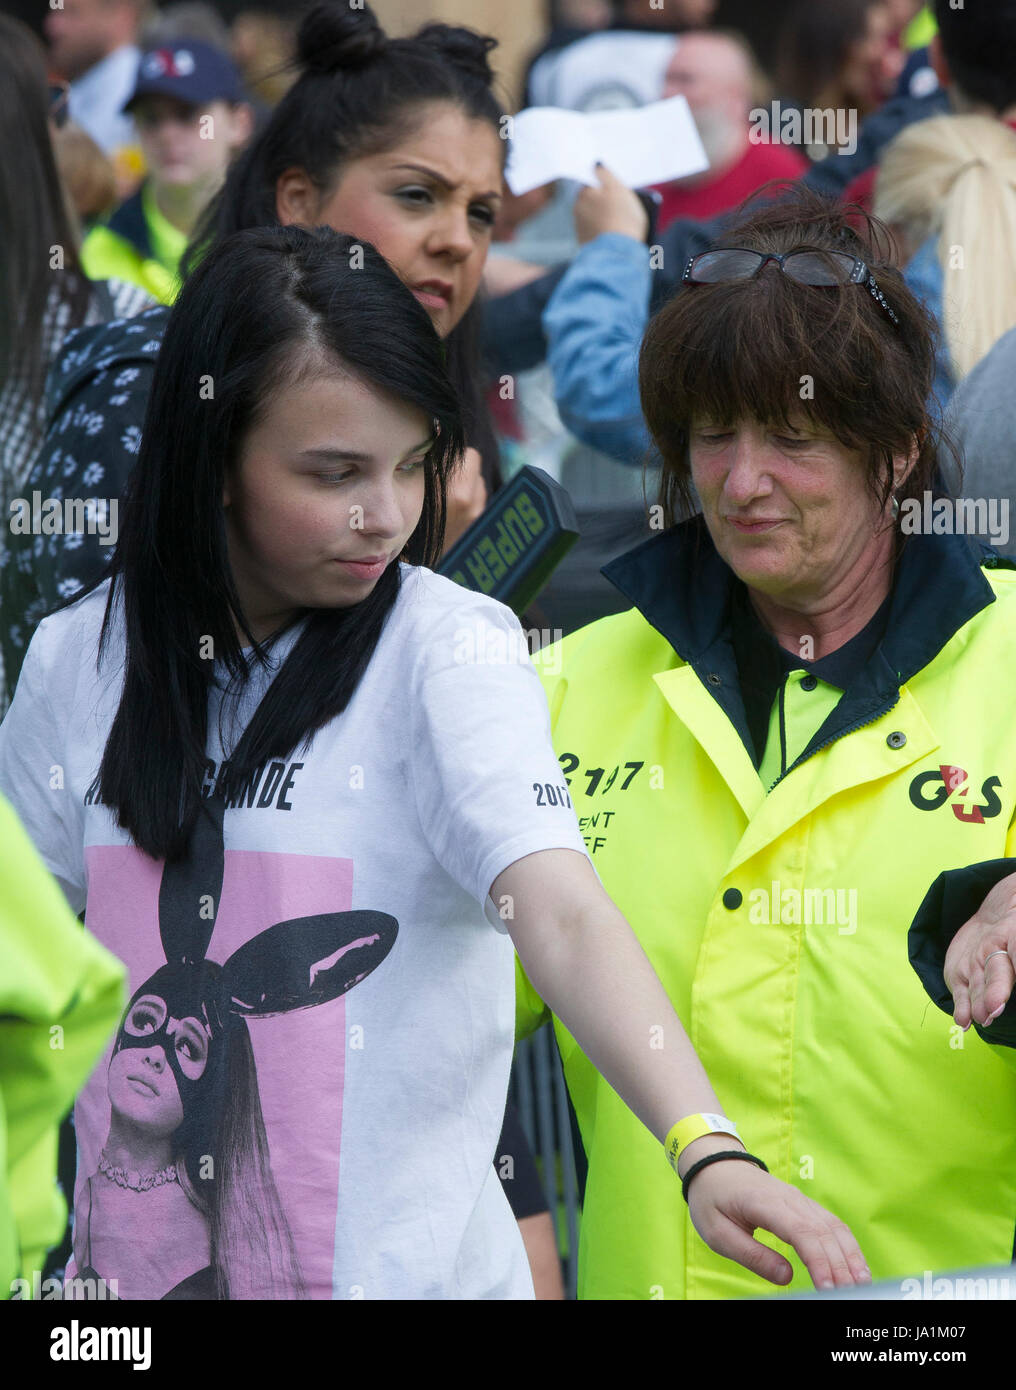 Manchester, UK. 4th June, 2017. Young Ariana Grande fan is scanned with tight security with armed police at the One love concert at the Emirates Old Trafford stadium. Manchester Picture Credit: GARY ROBERTS/Alamy Live News Stock Photo